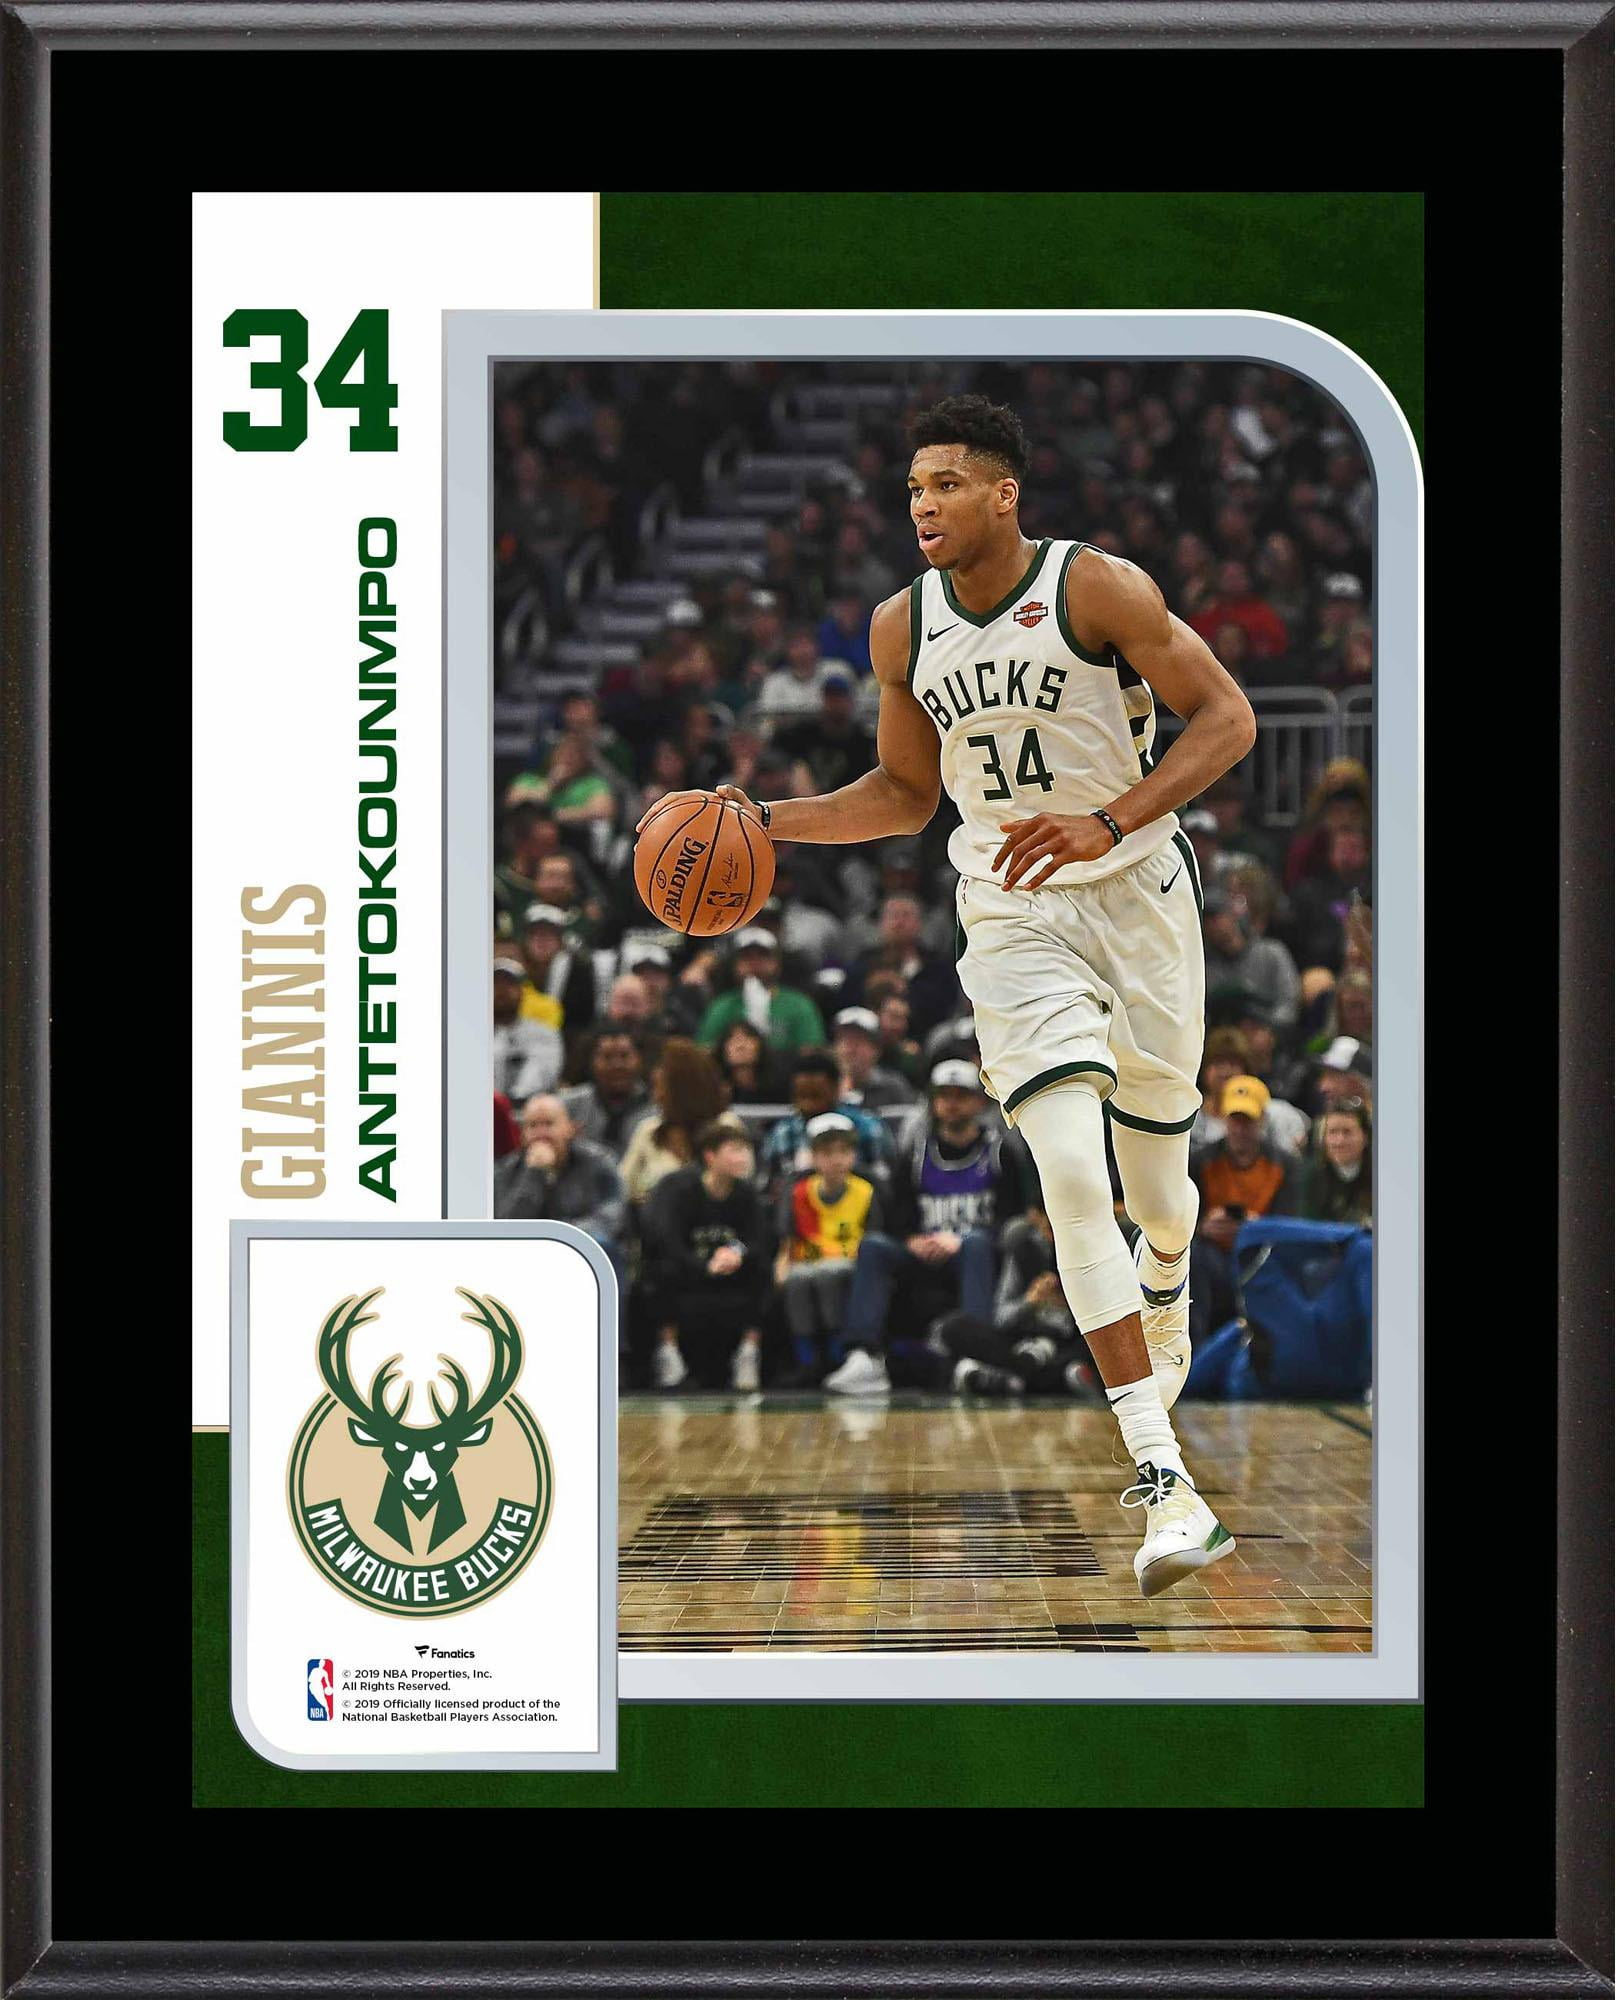 Milwaukee Bucks: Giannis Antetokounmpo 2021 Black Jersey - NBA Removable Wall Adhesive Wall Decal Giant Athlete +2 Wall Decals 27W x 50H